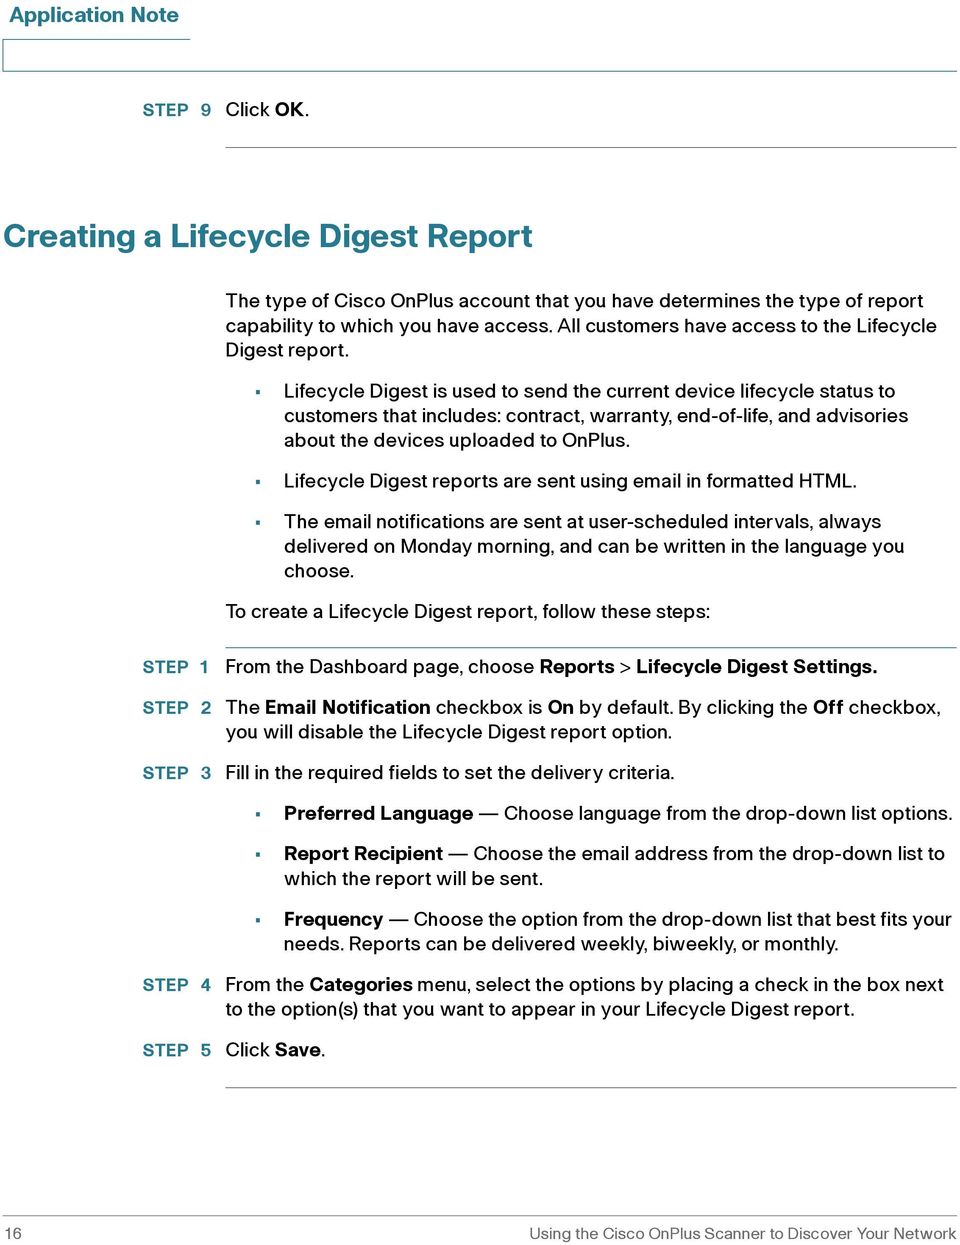 Lifecycle Digest is used to send the current device lifecycle status to customers that includes: contract, warranty, end-of-life, and advisories about the devices uploaded to OnPlus.